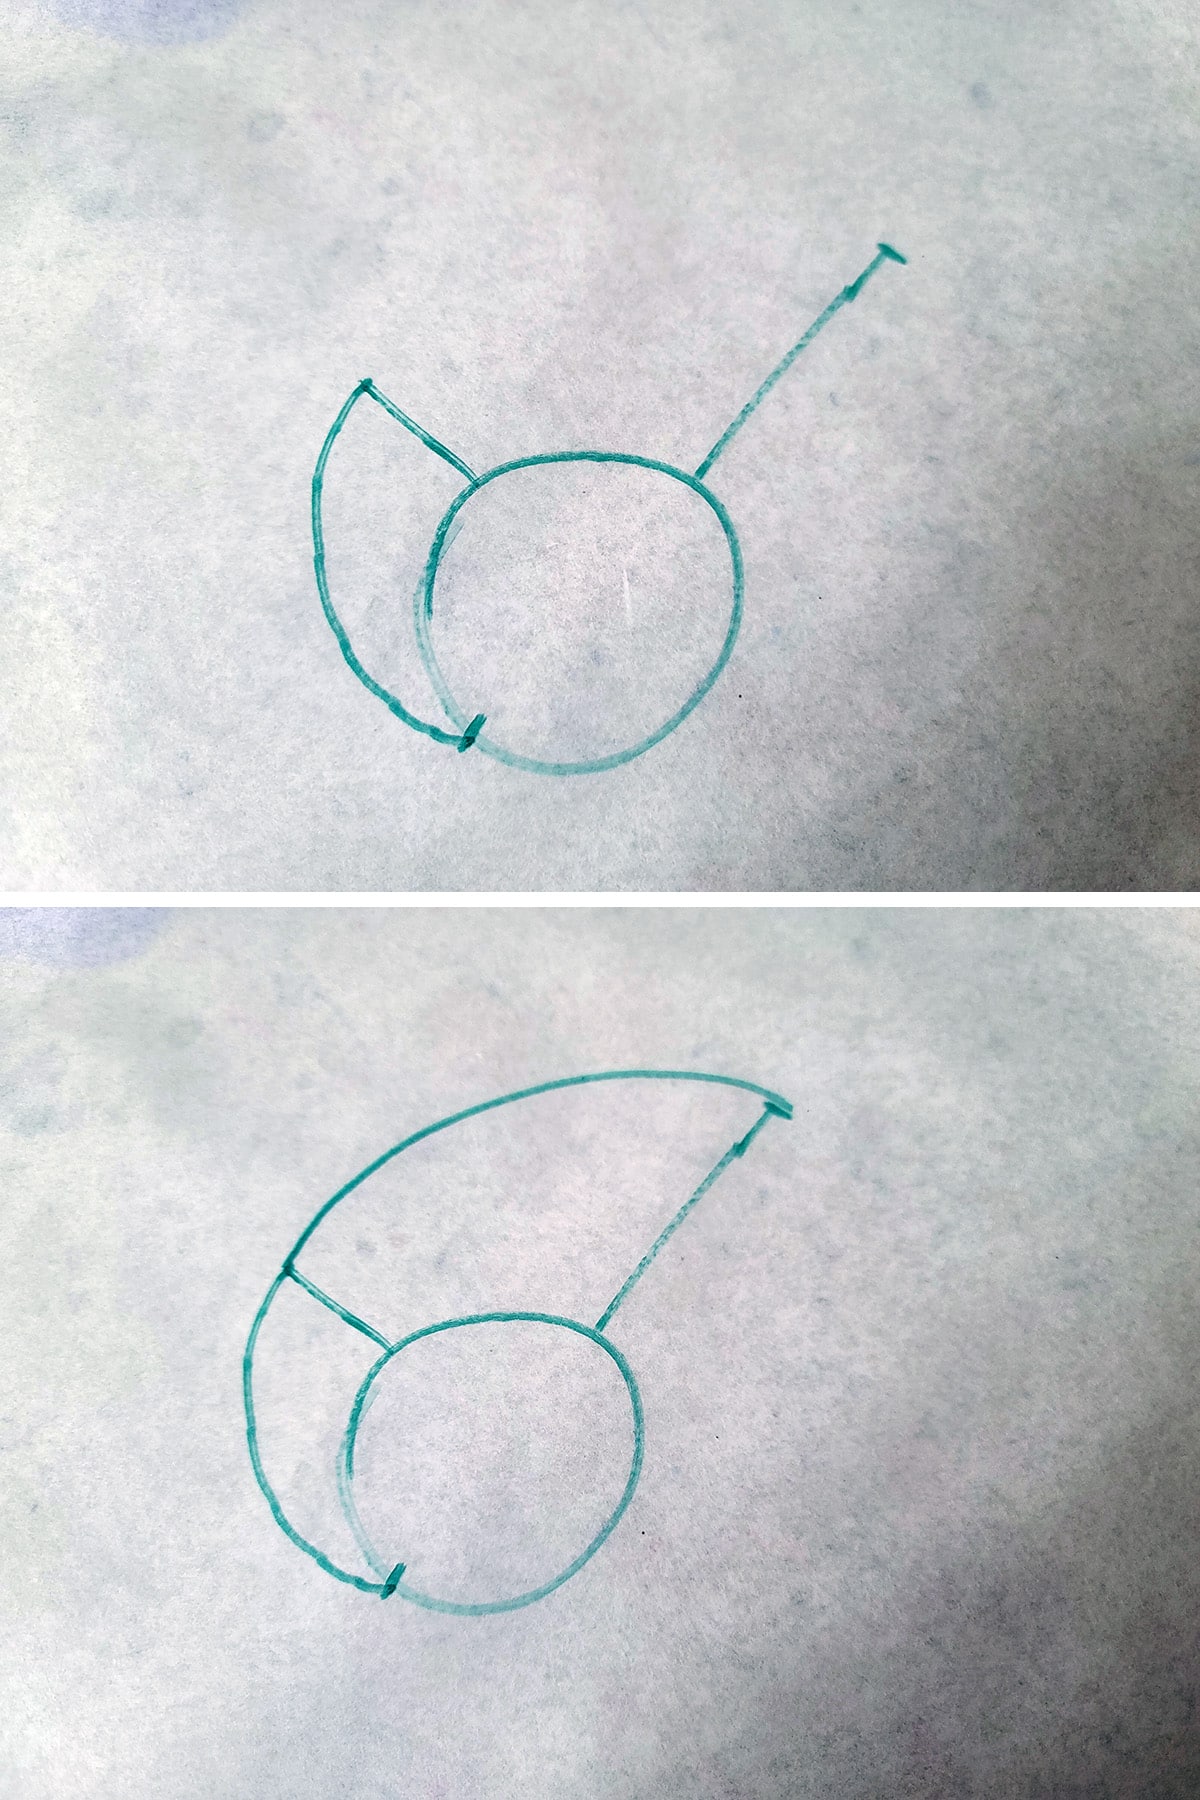 A diagram showing a spiral line extending out from a circle, as described.